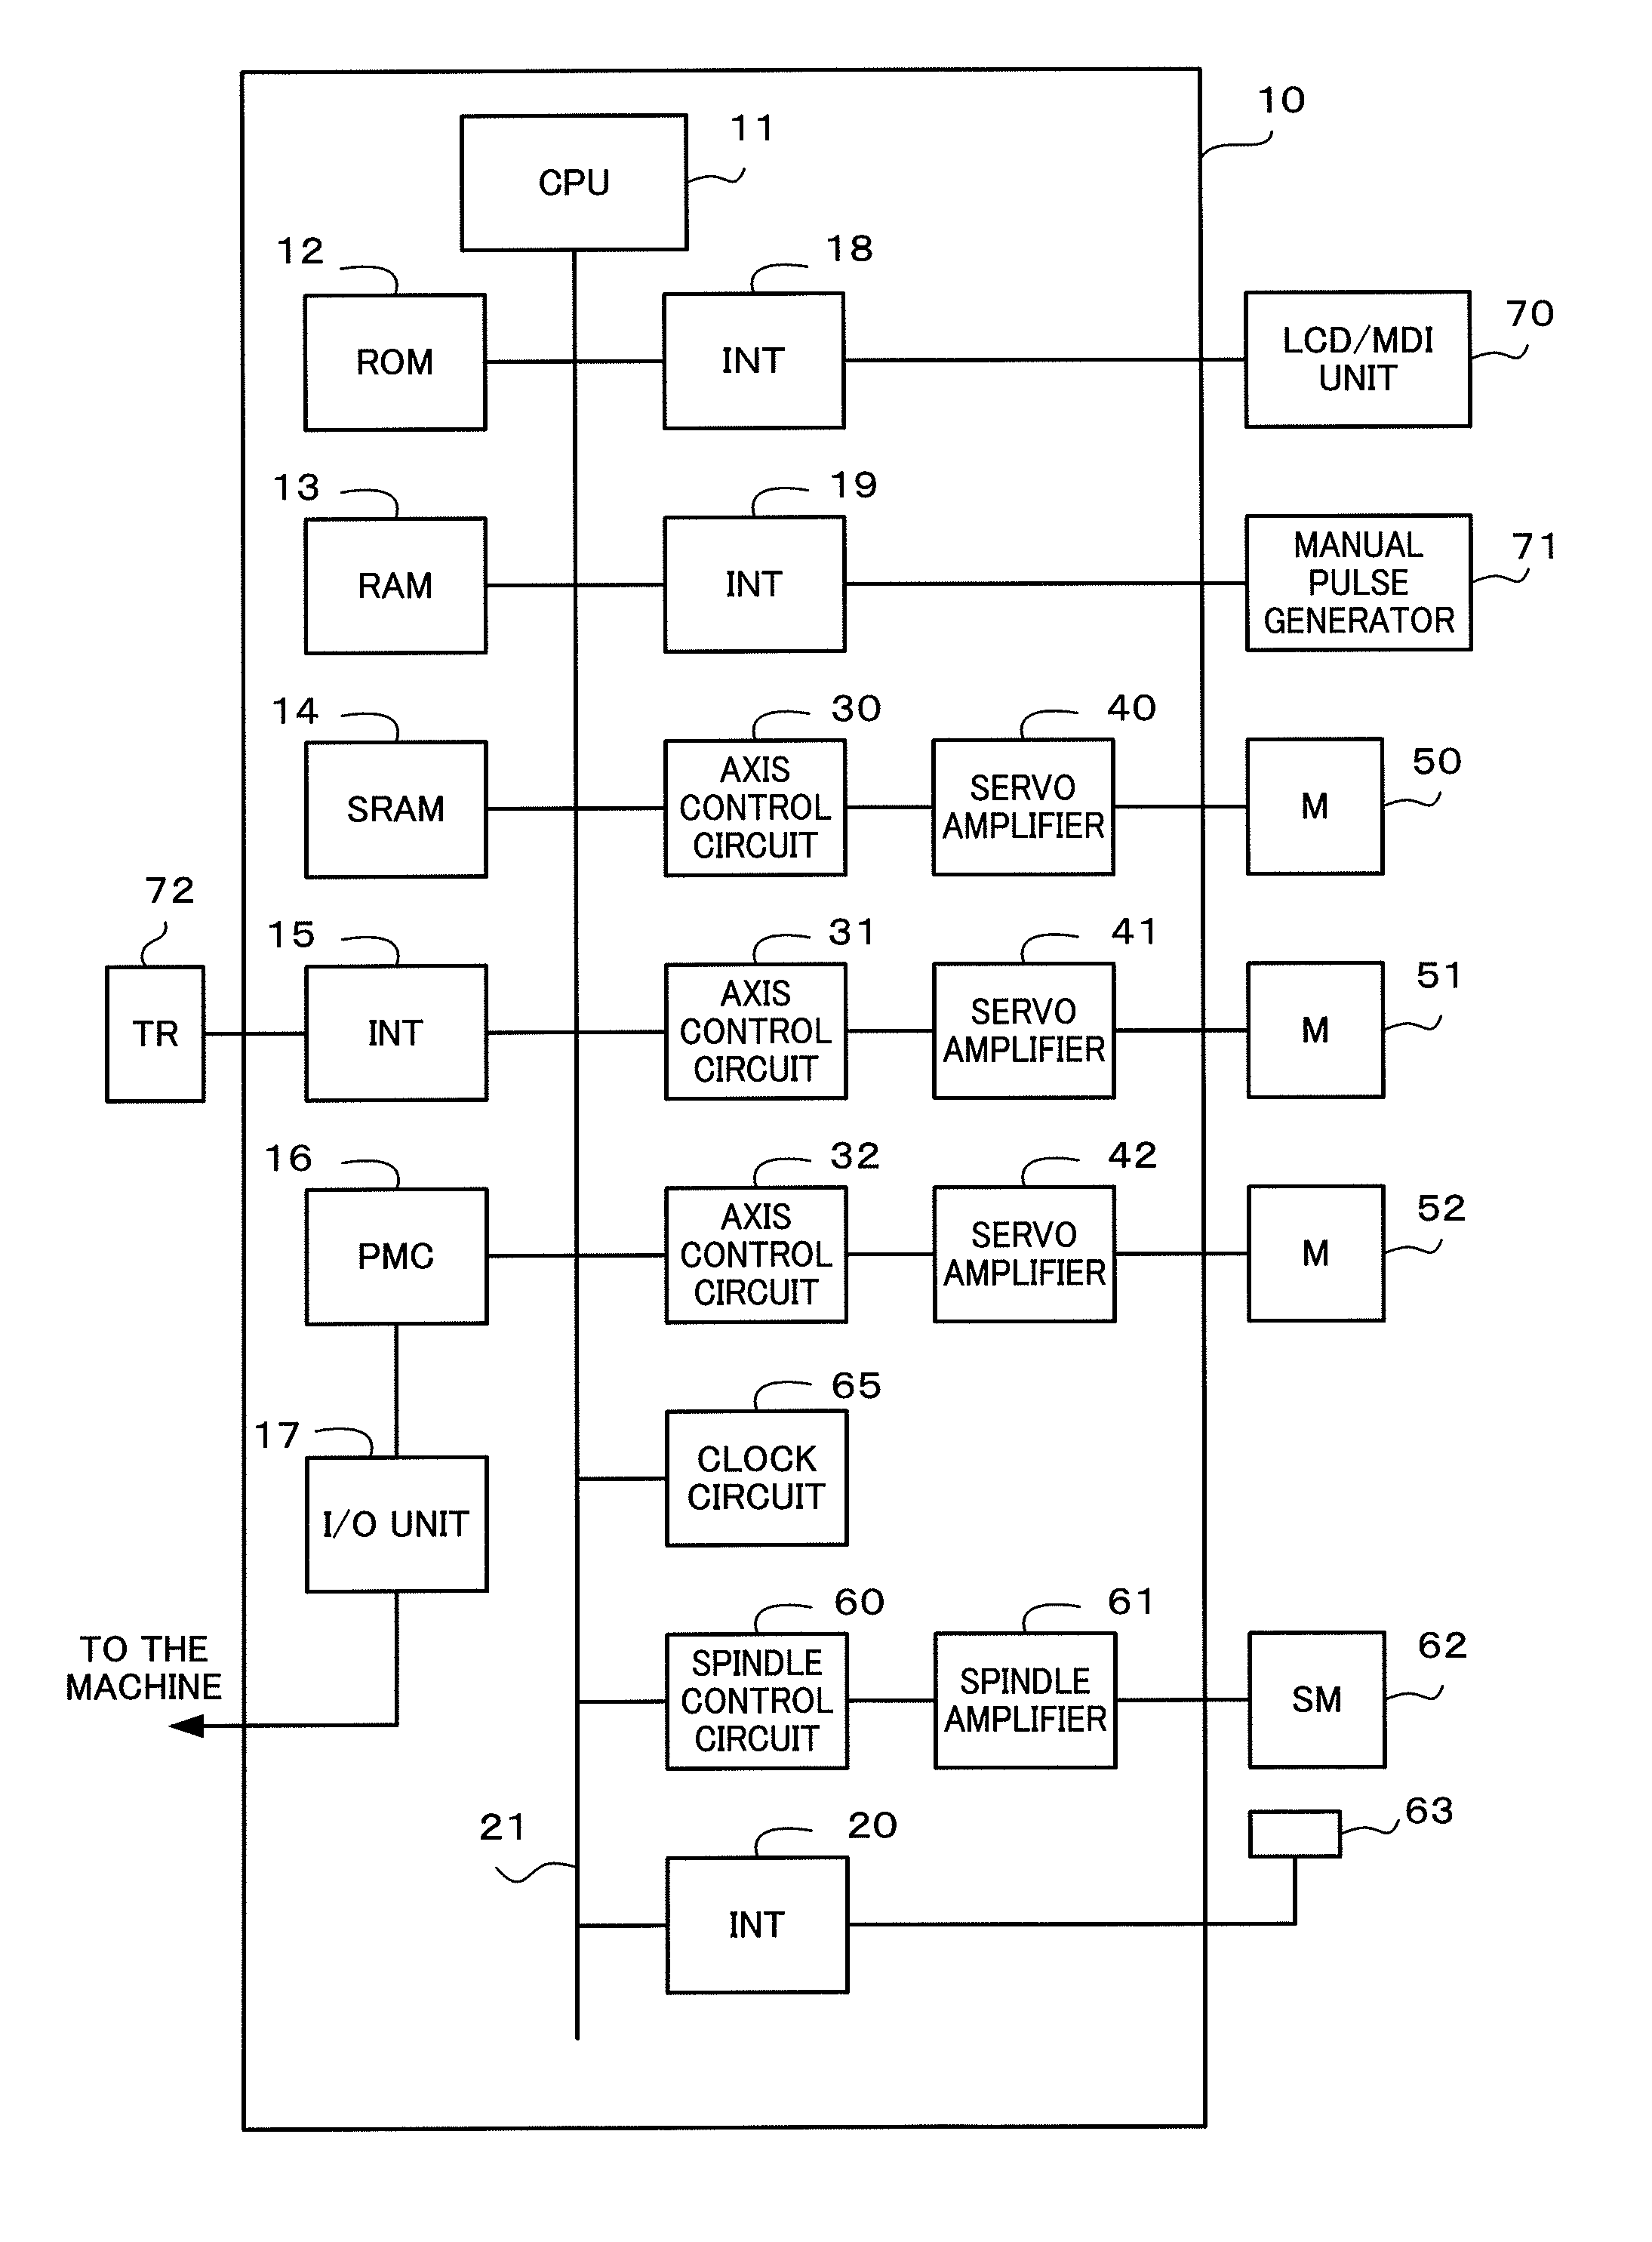 Warm-up control device for machine tool